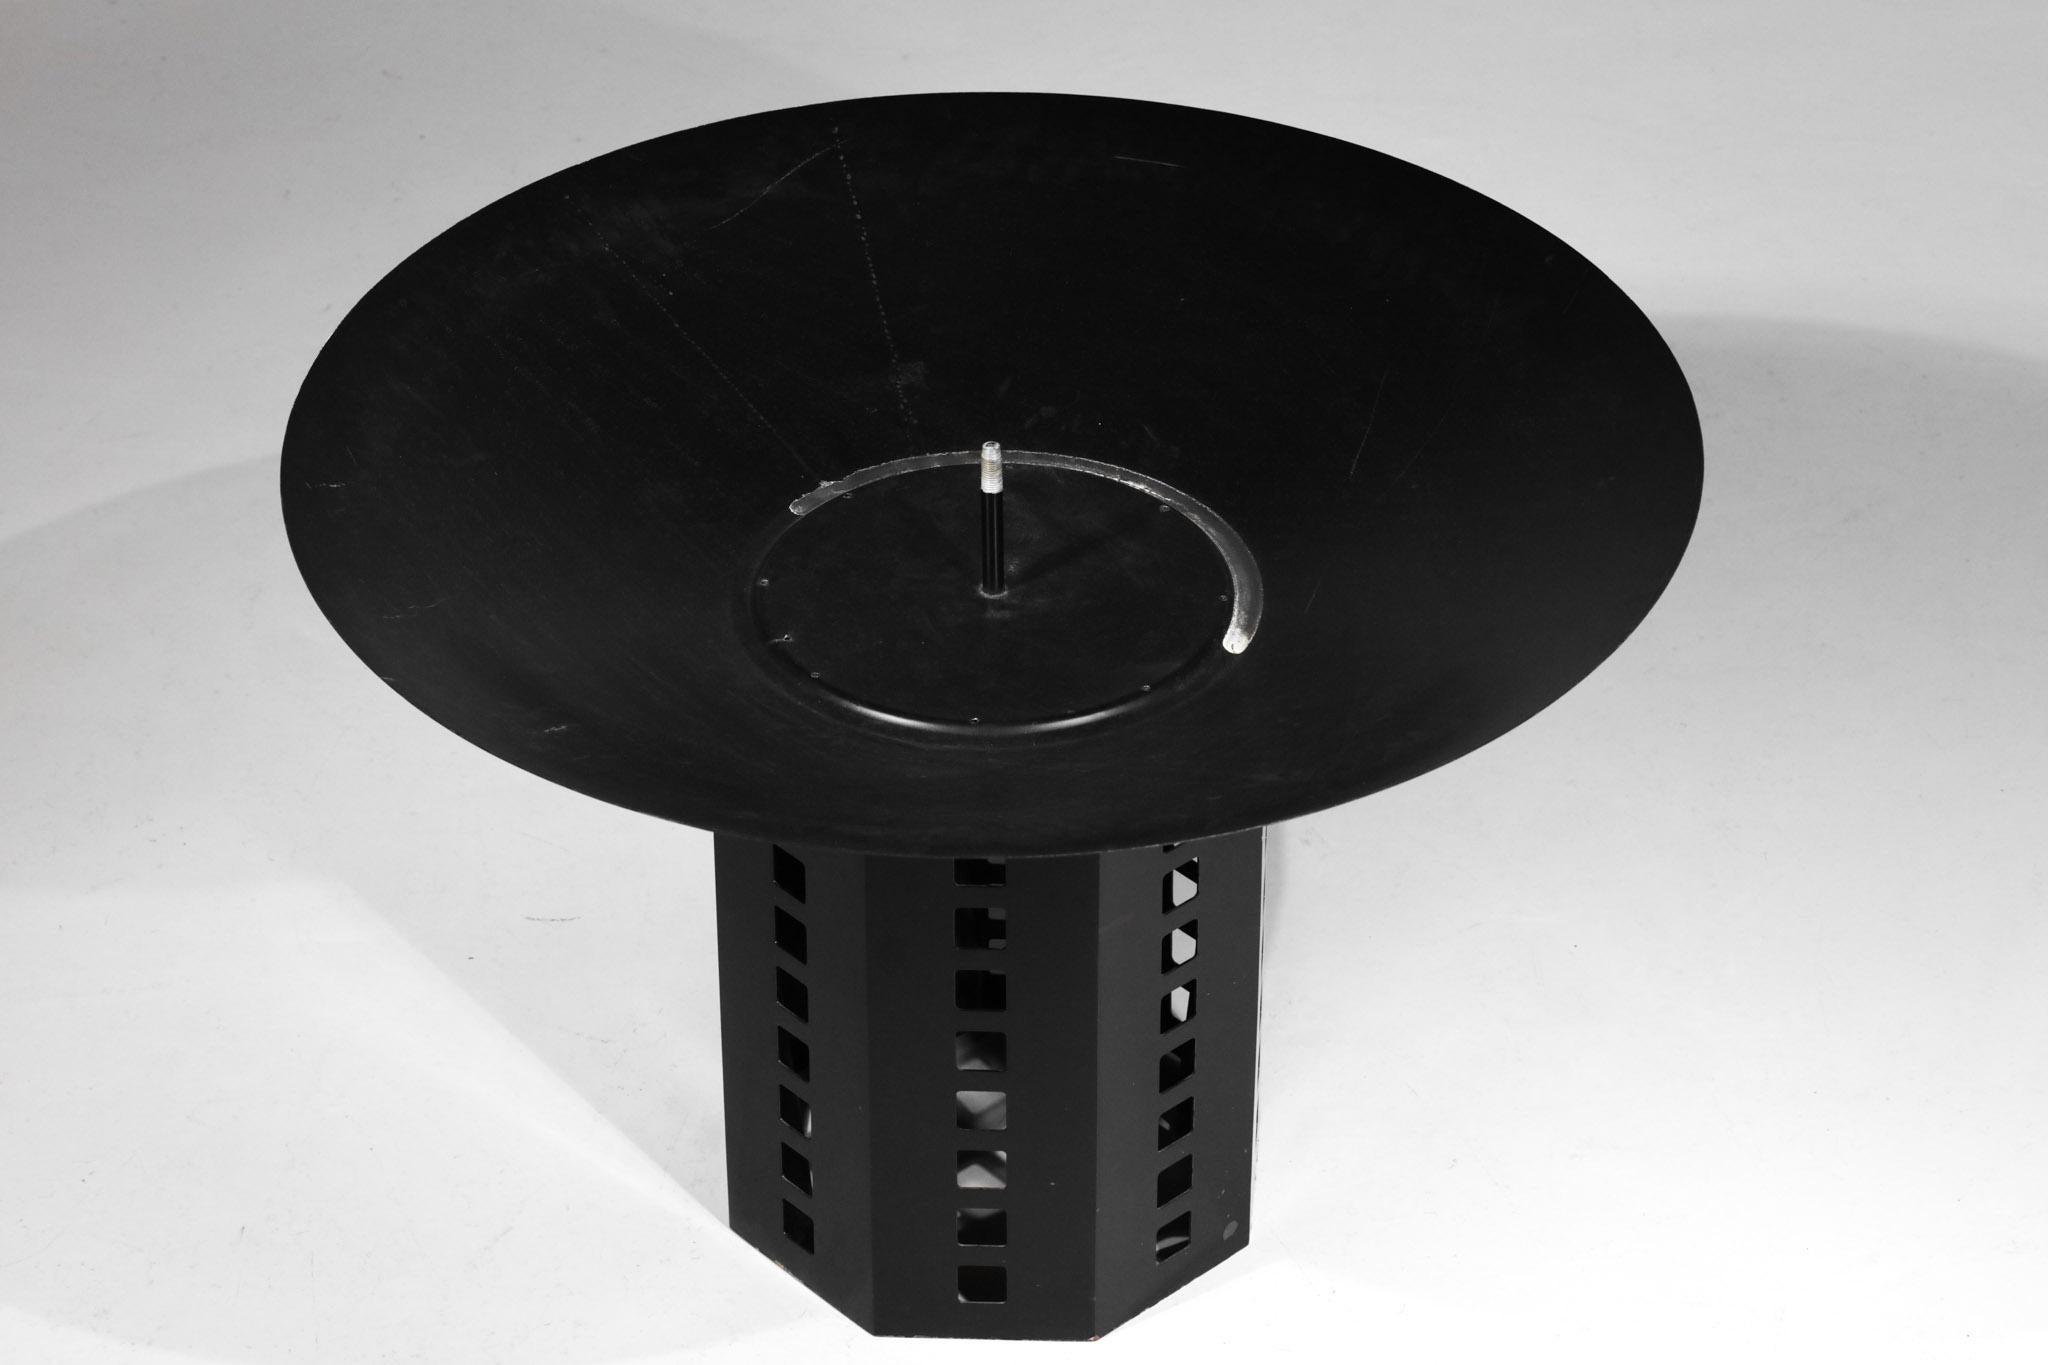 Modernist dining table based on a design by the Austrian designer Joseph Hoffmann, re-edition of the 70's for Bieffeplast. Black lacquered metal base, round black lacquered wood top (original paint). Quite rare model, nice vintage condition, note